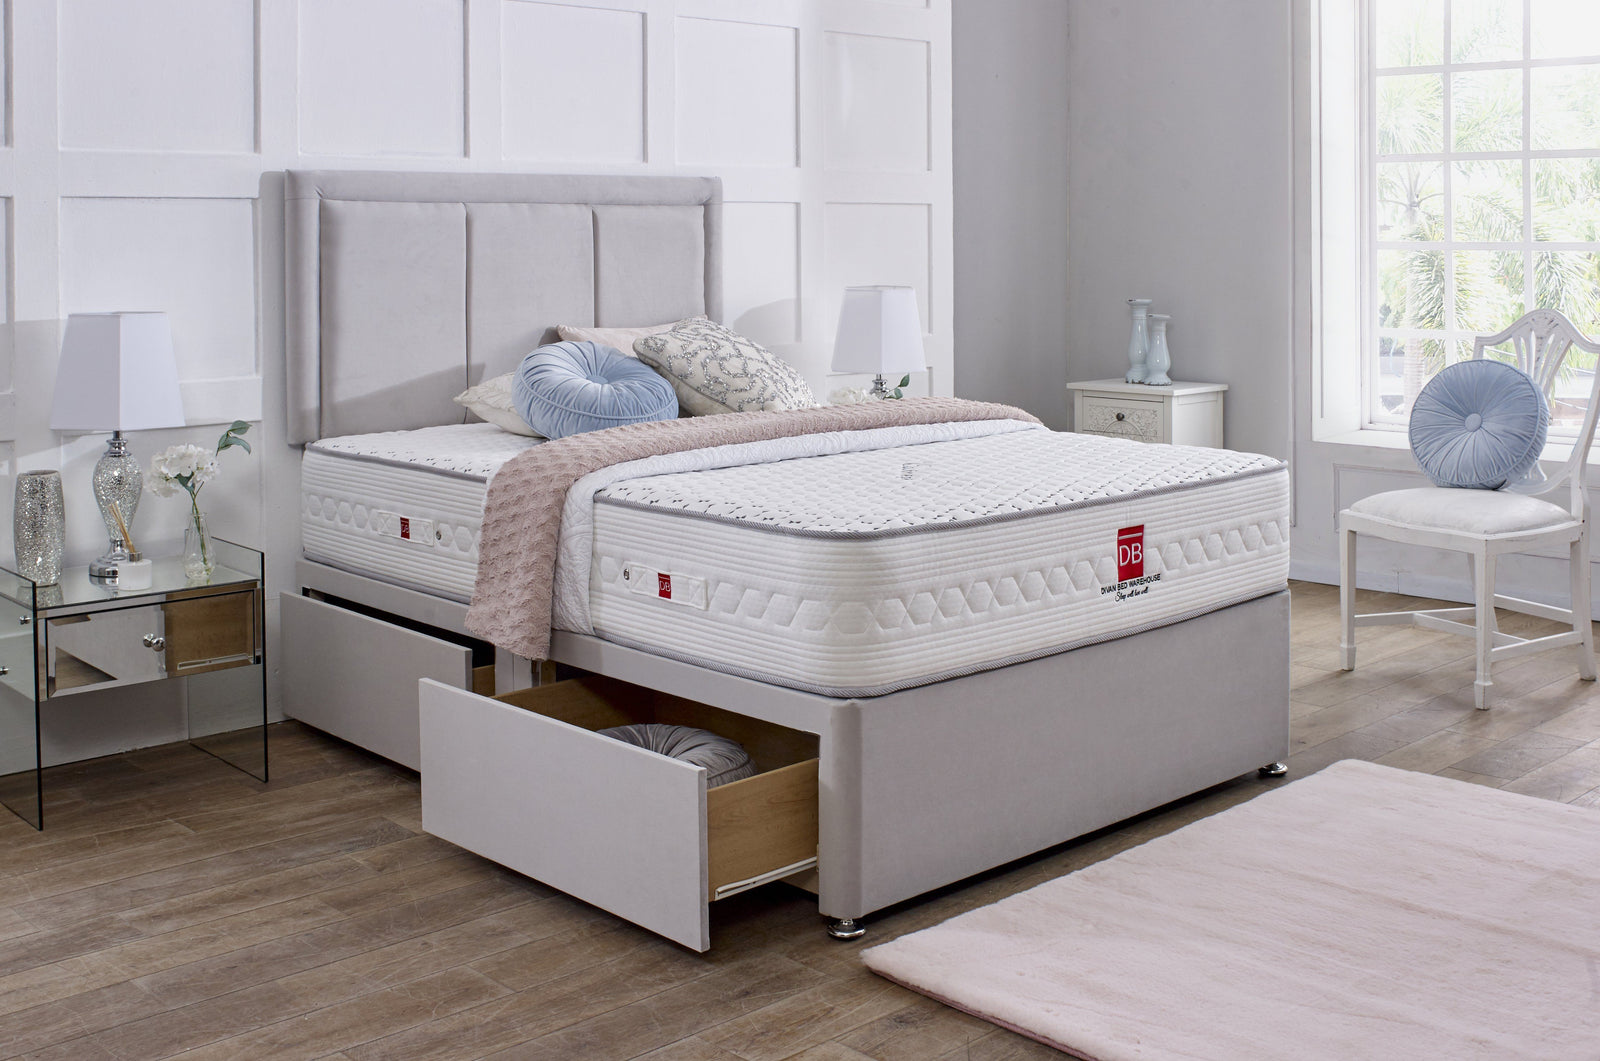 The Importance Of Investing In High-Quality Divan Beds